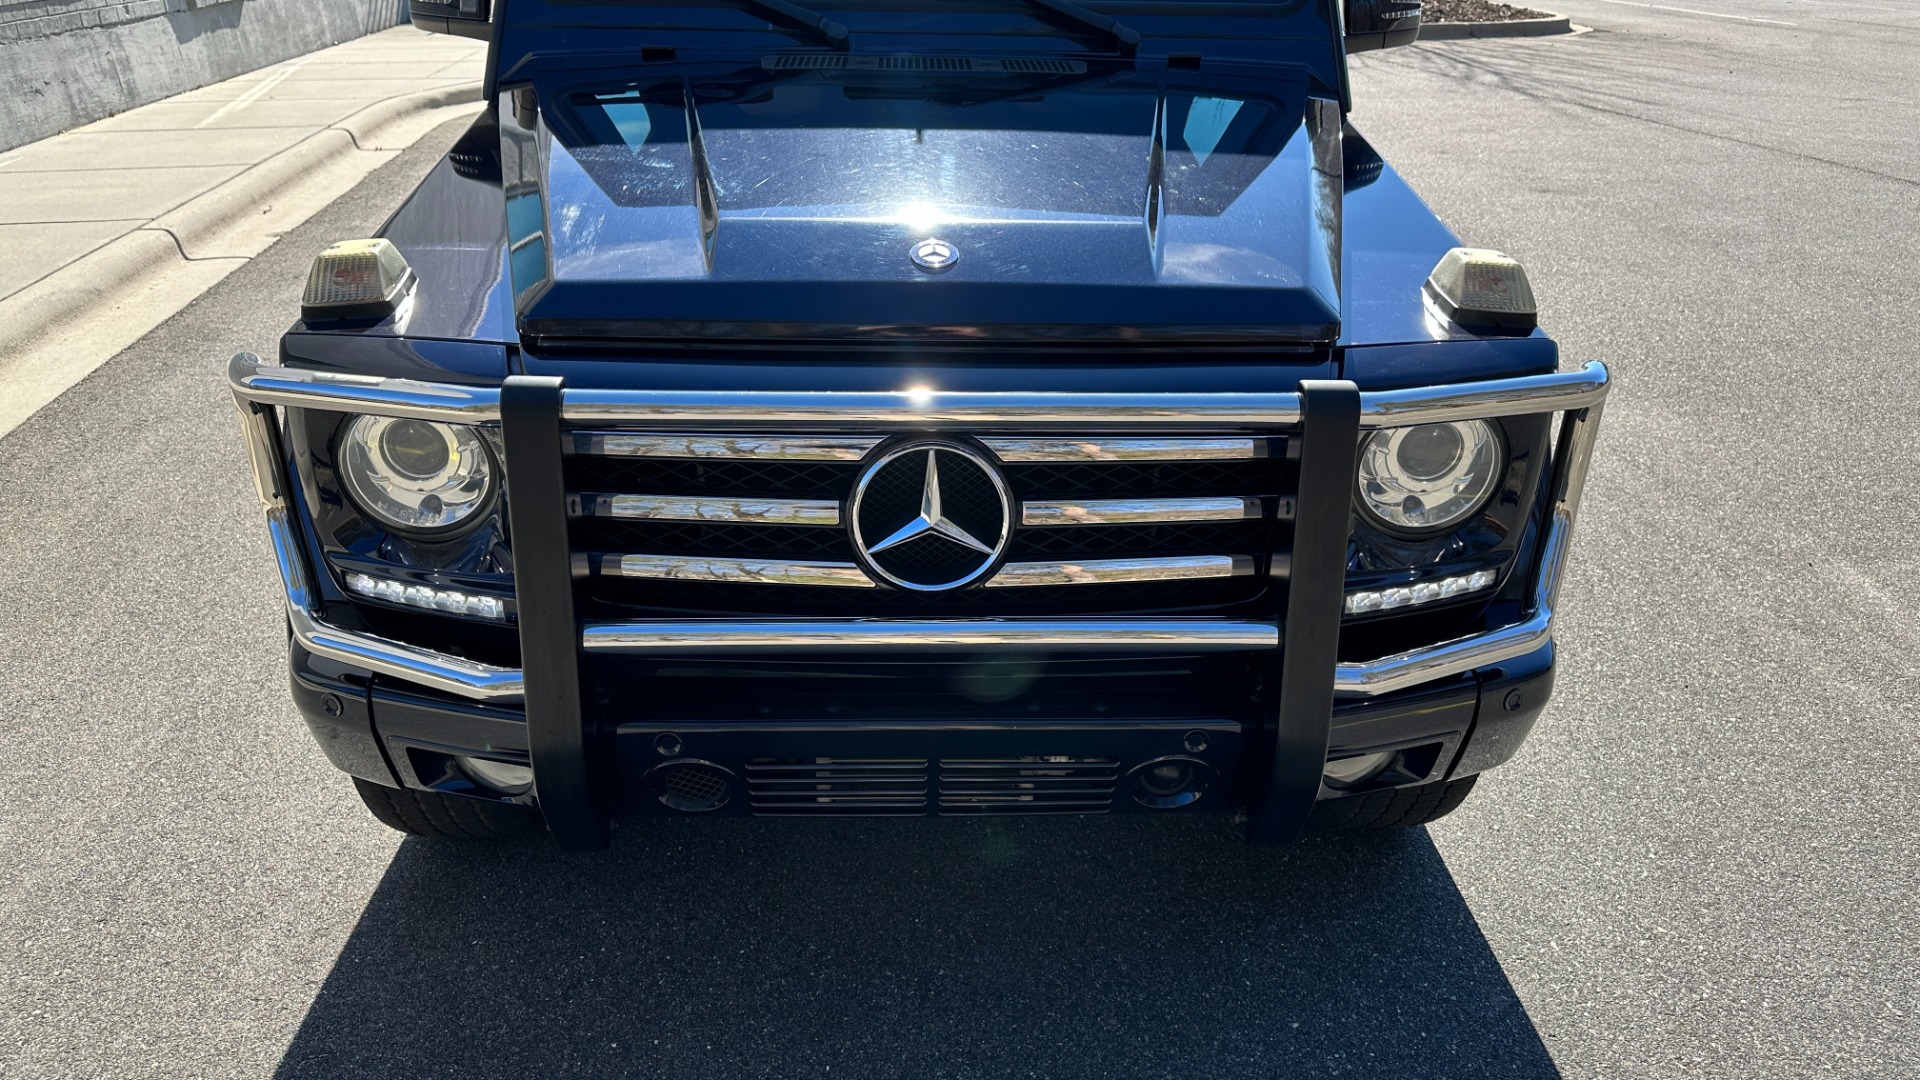 Used 2015 Mercedes-Benz G-Class G550 / DESIGNO NAPPA LEATHER / DESIGNO HEADLINER / HEATED STEERING / NAV /  for sale Sold at Formula Imports in Charlotte NC 28227 9